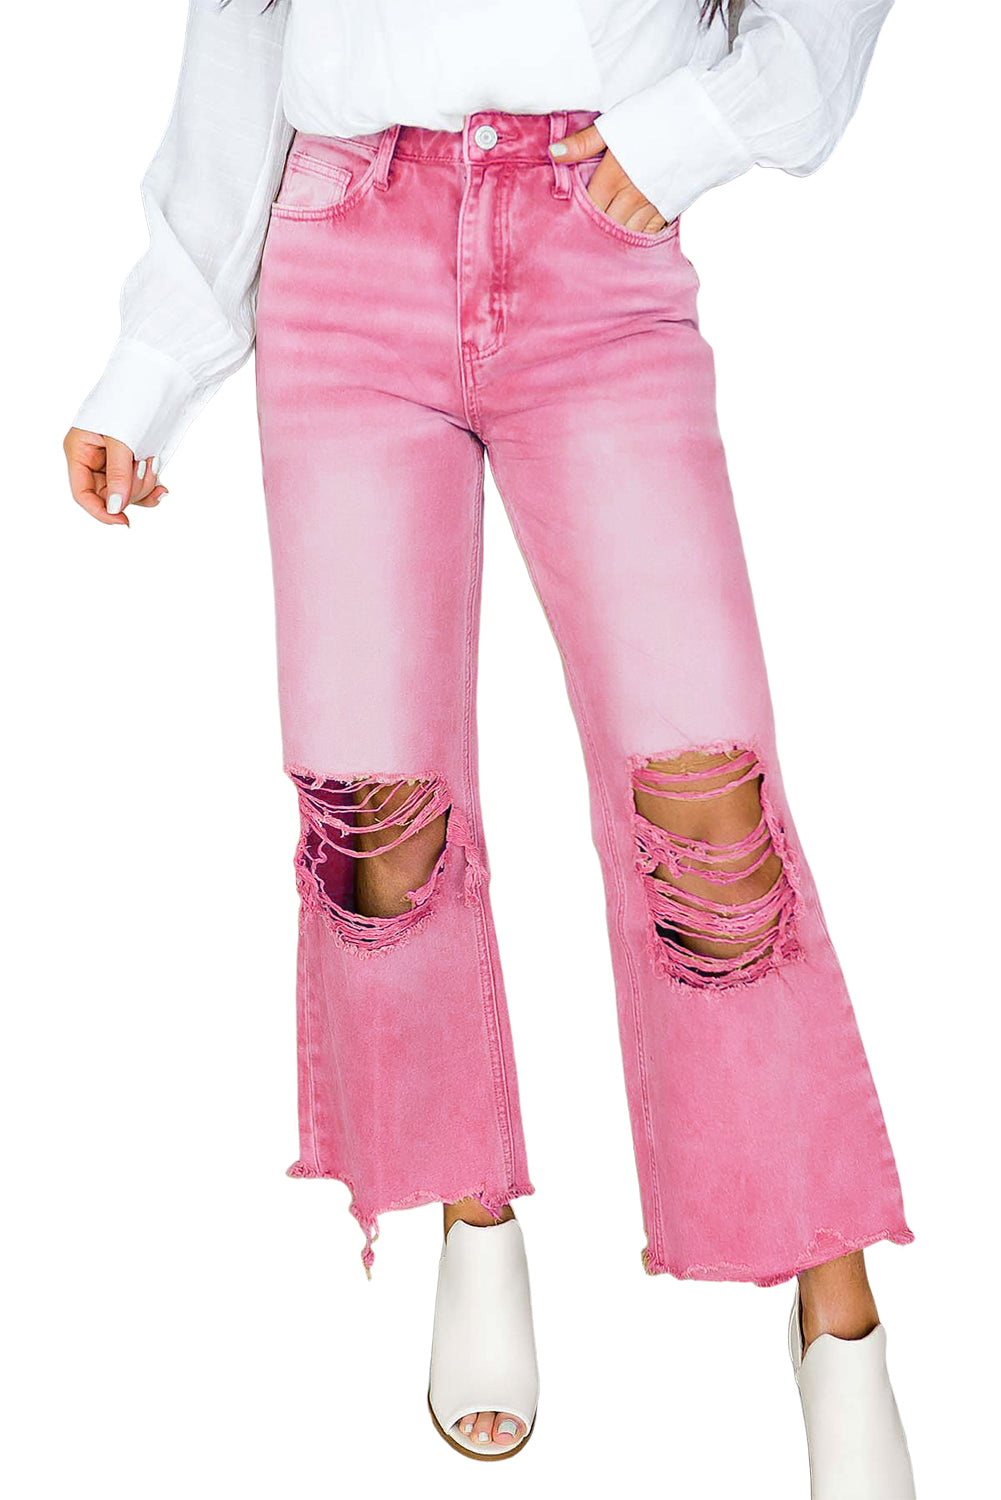 Peach Blossom Distressed Hollow-out High Waist Cropped Flare Jeans